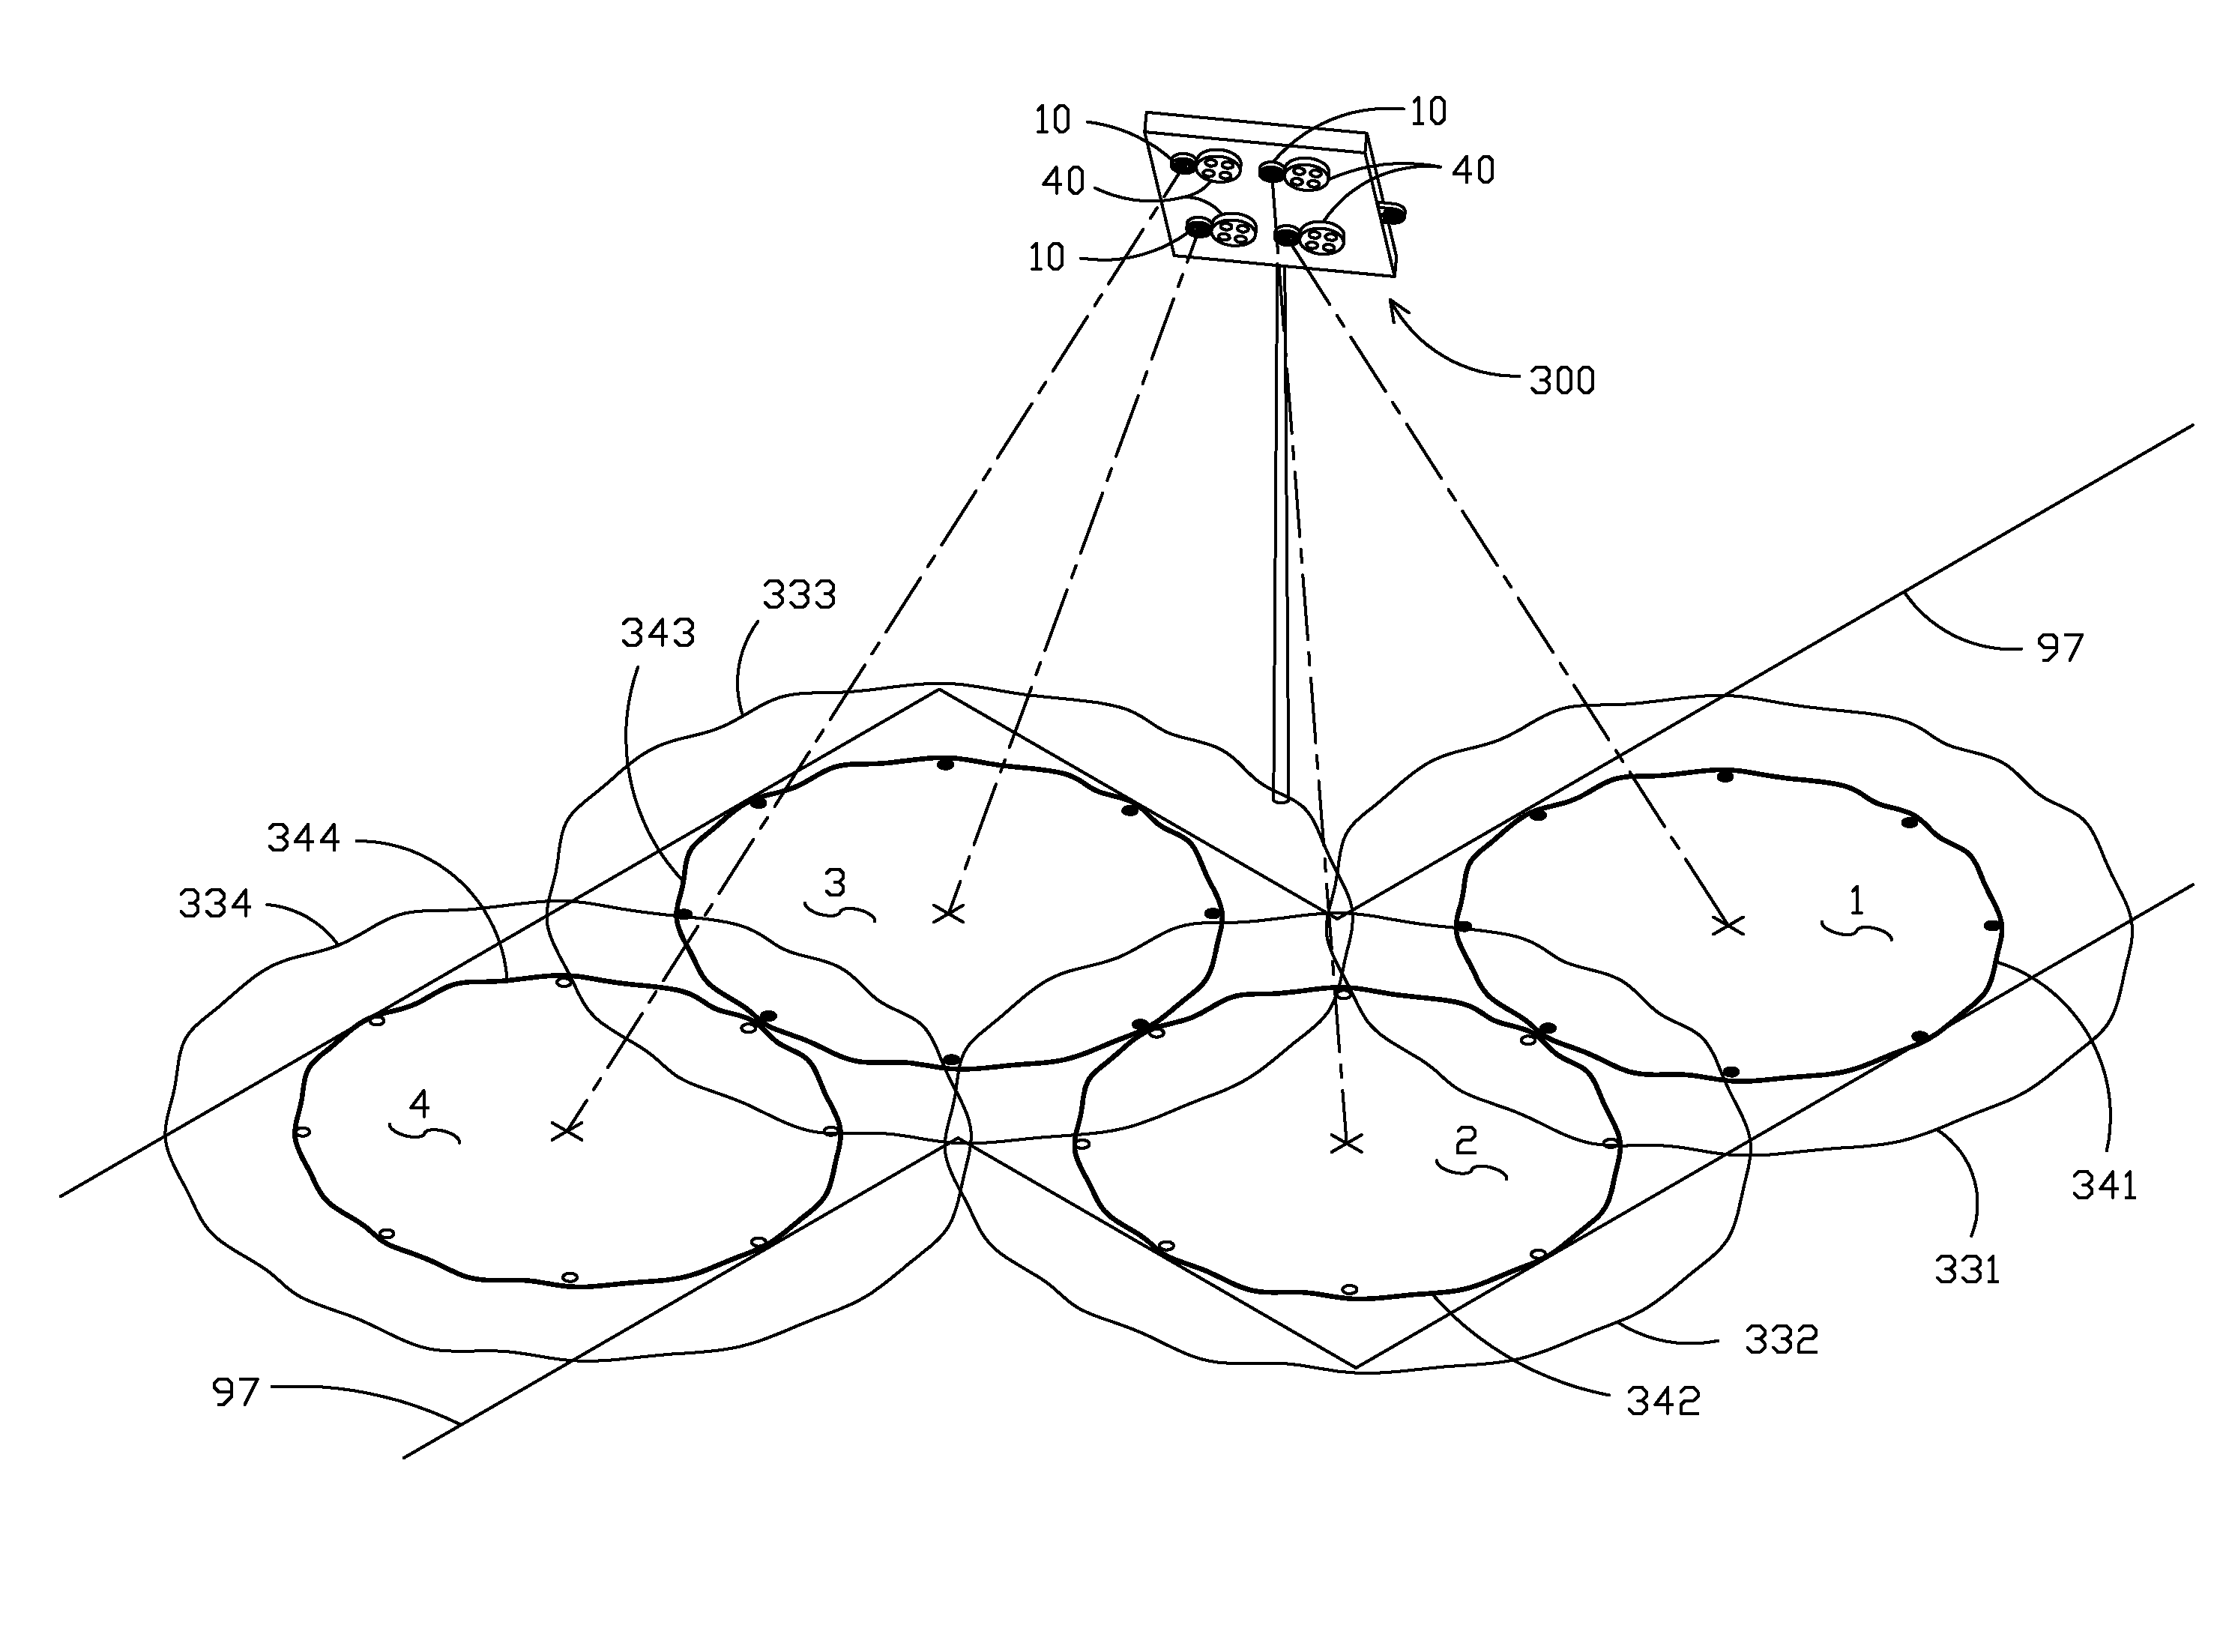 Method, system, and apparatus for aiming LED lighting